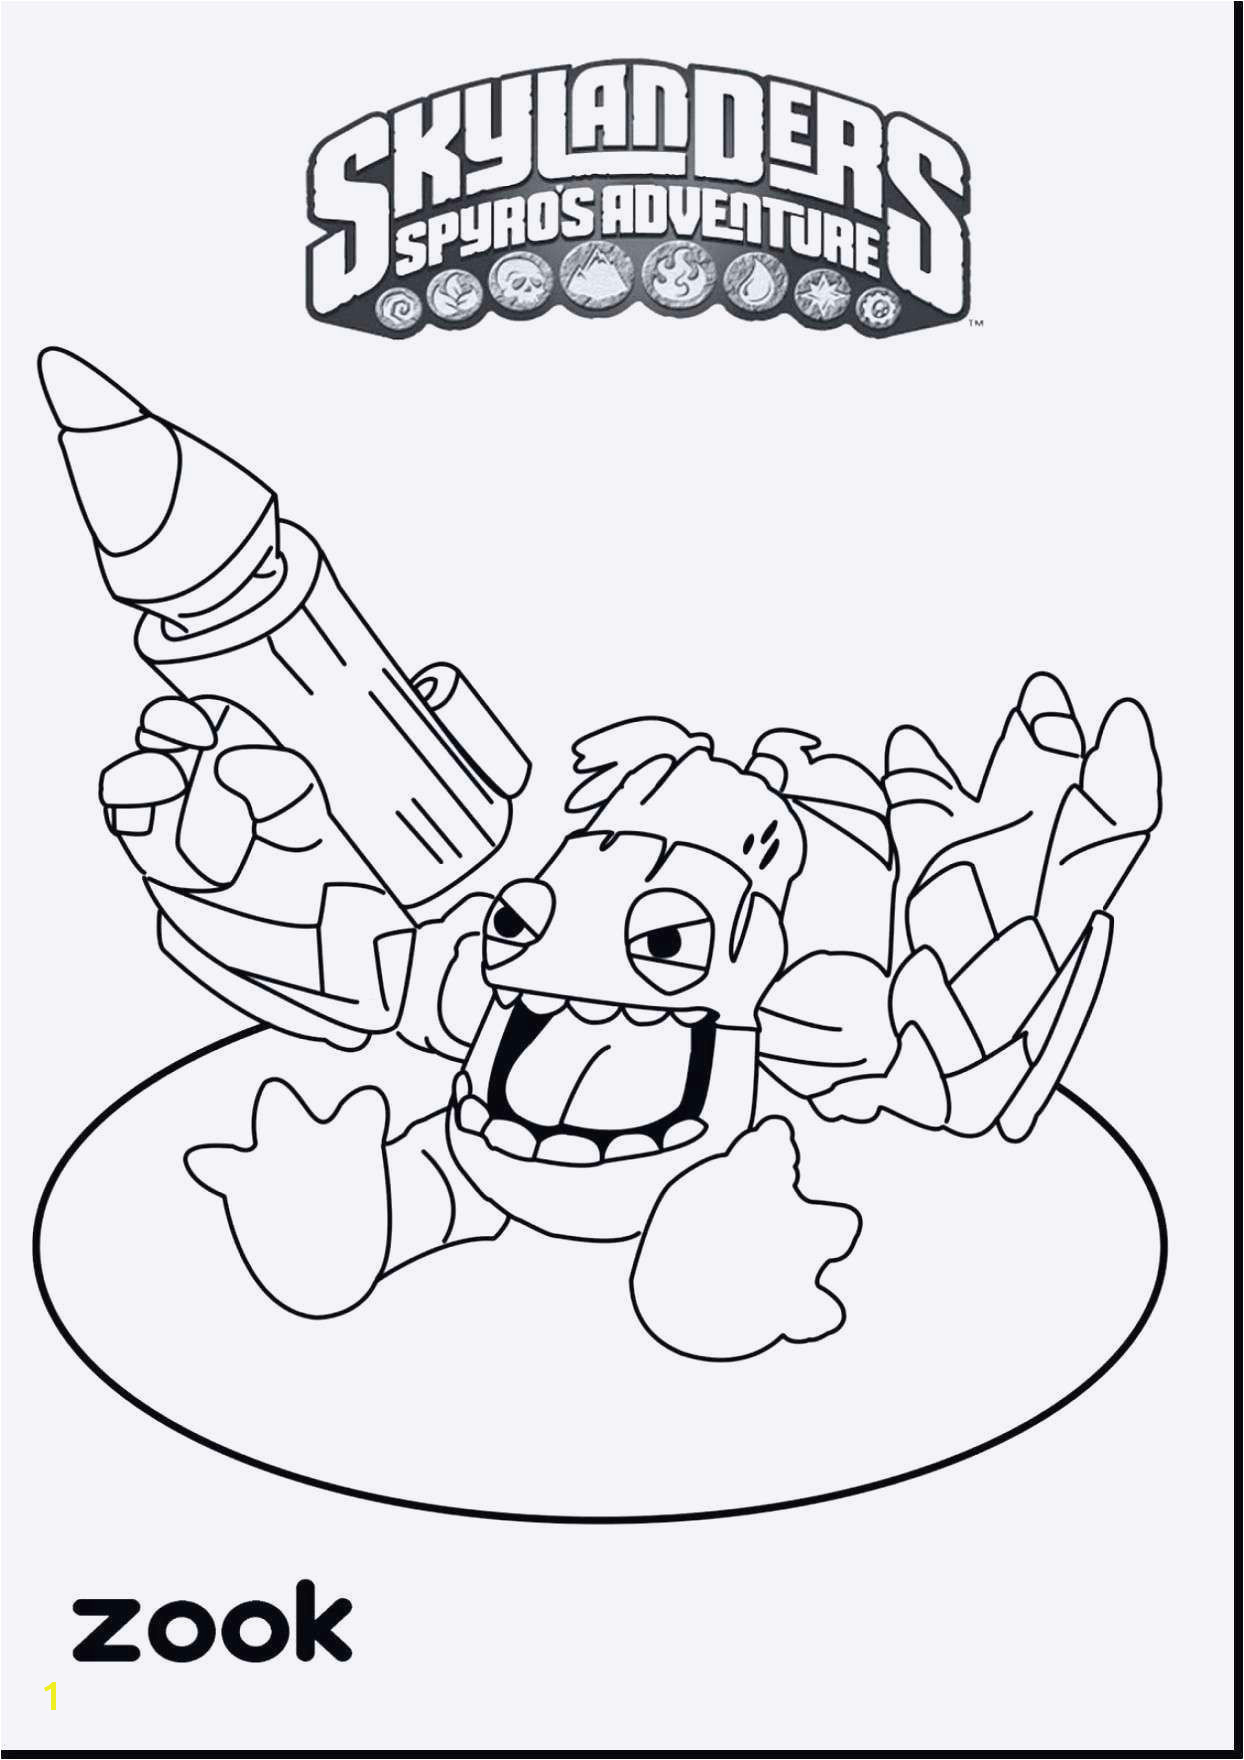 Free Cool Coloring Page Inspirational Witch Coloring Pages New Crayola Pages 0d Coloring Page Printable Example